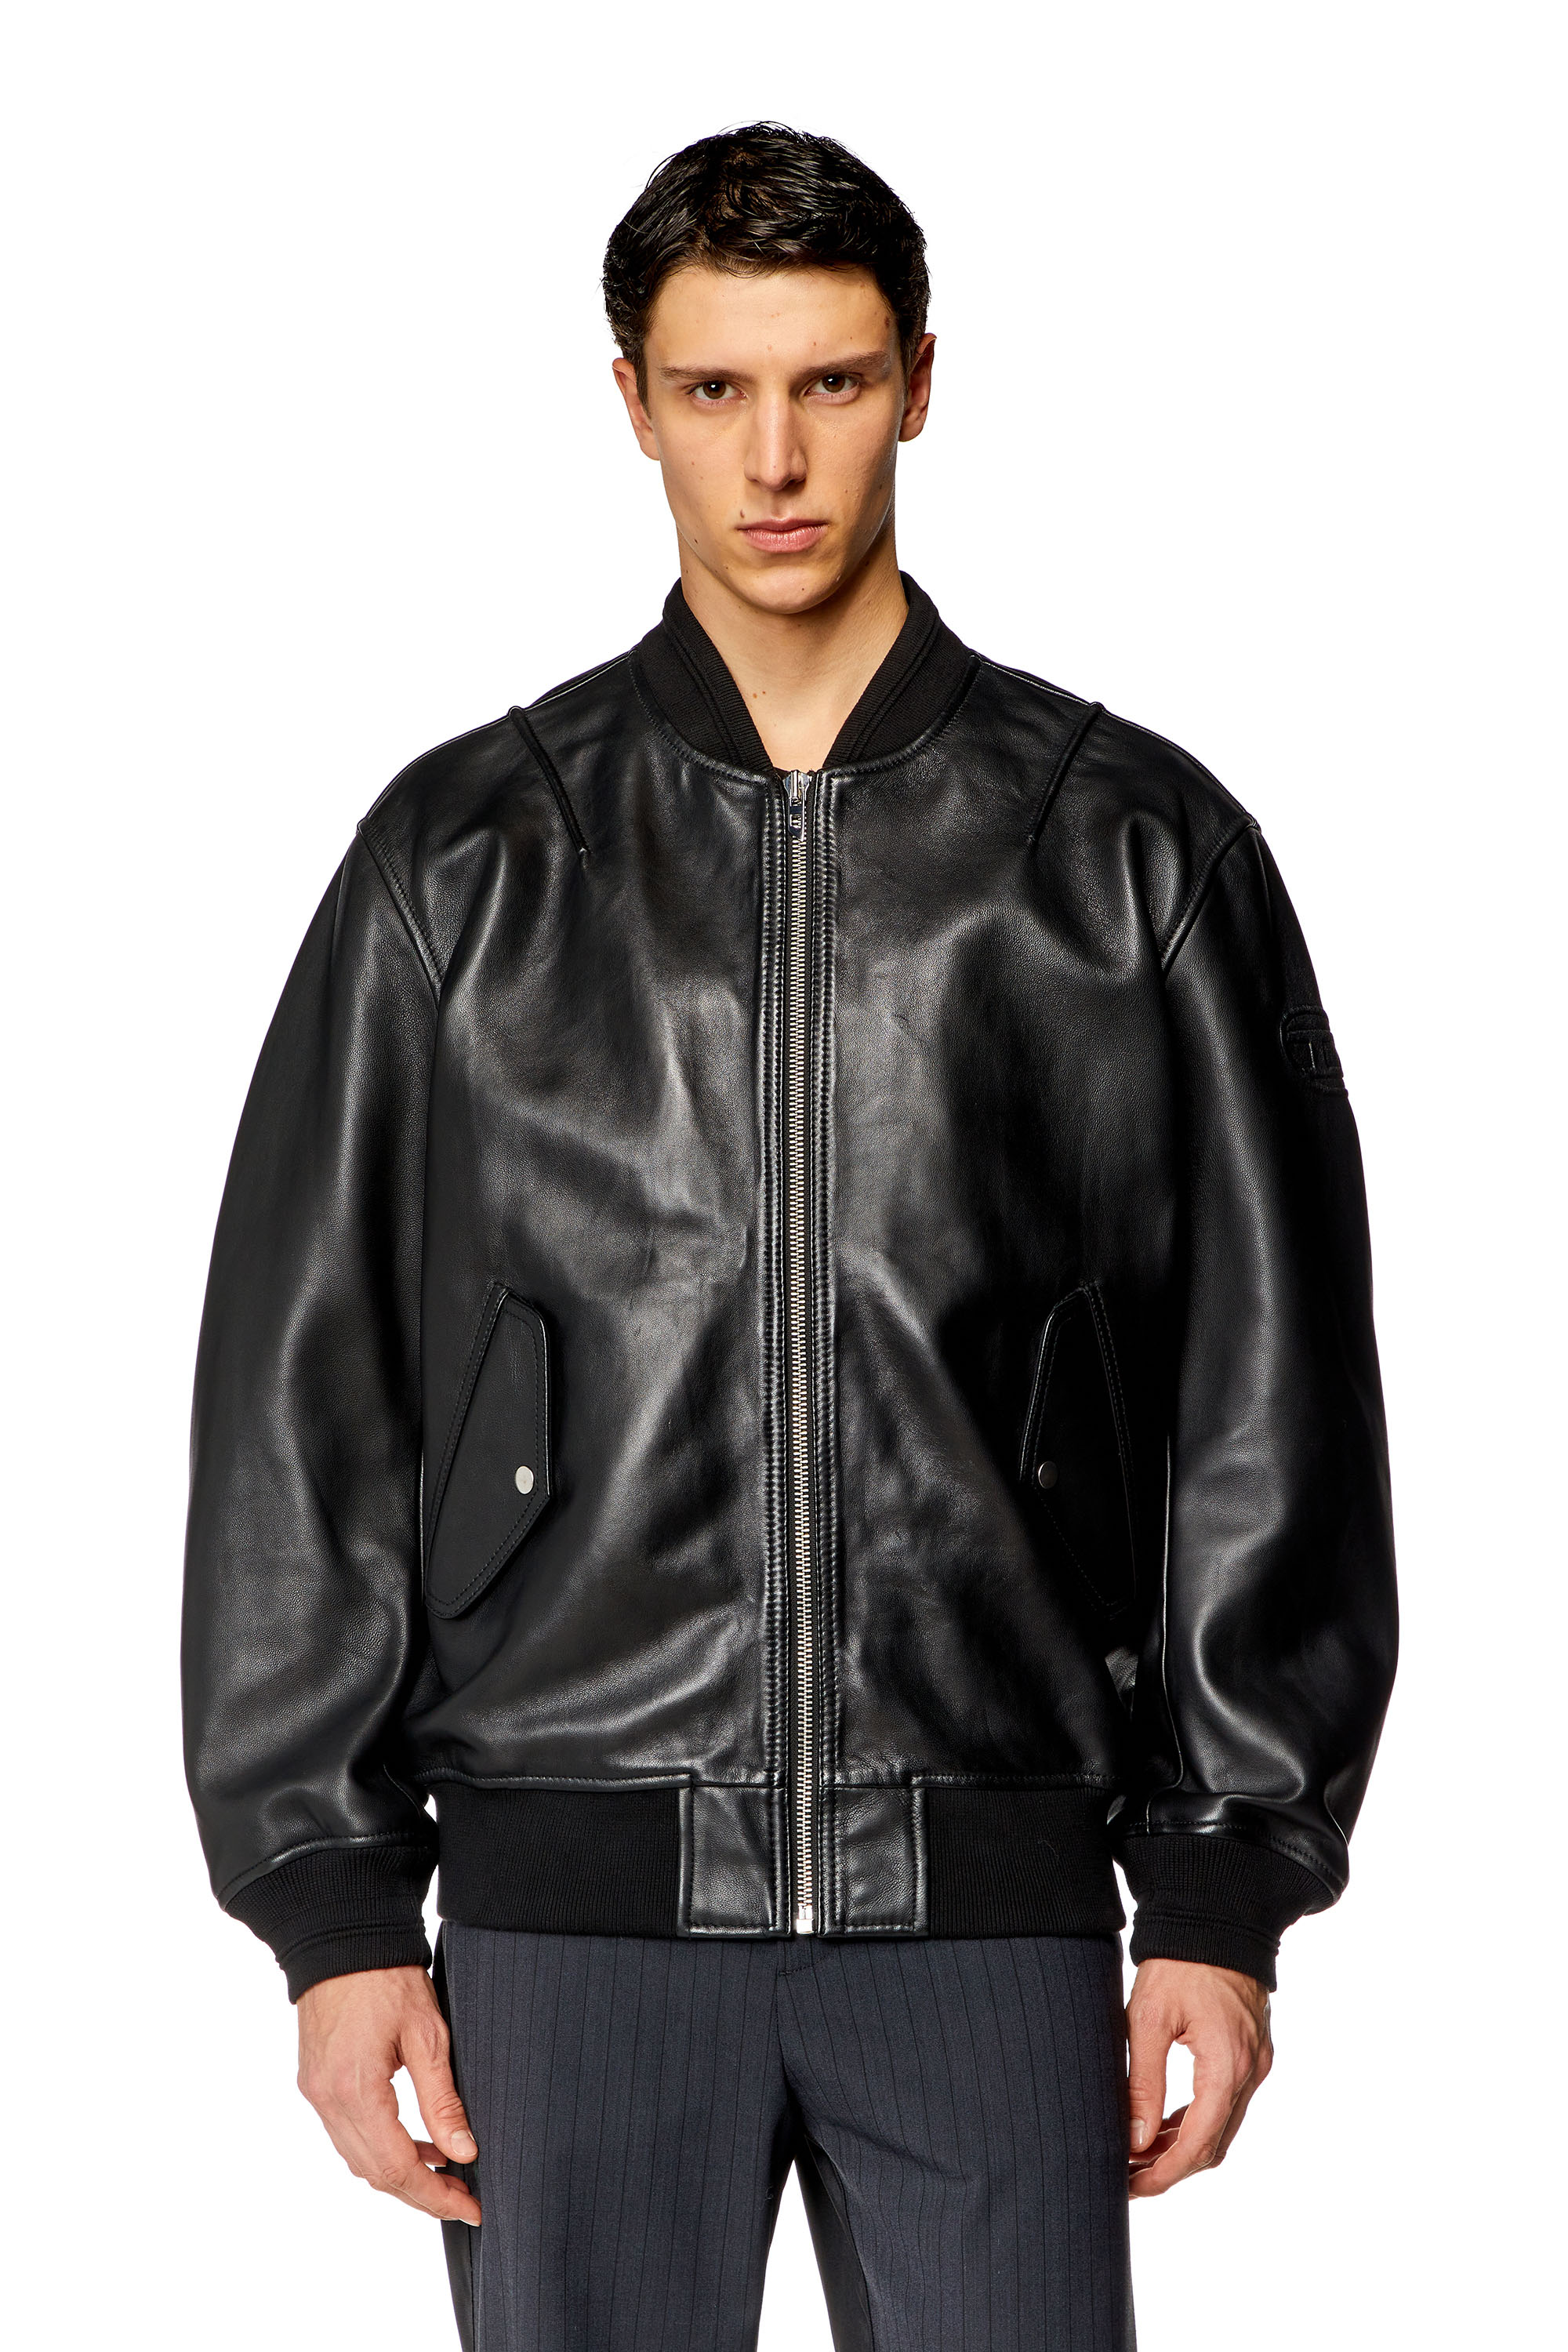 Men's Leather Jackets: Trench, Biker, Perforated | Diesel®